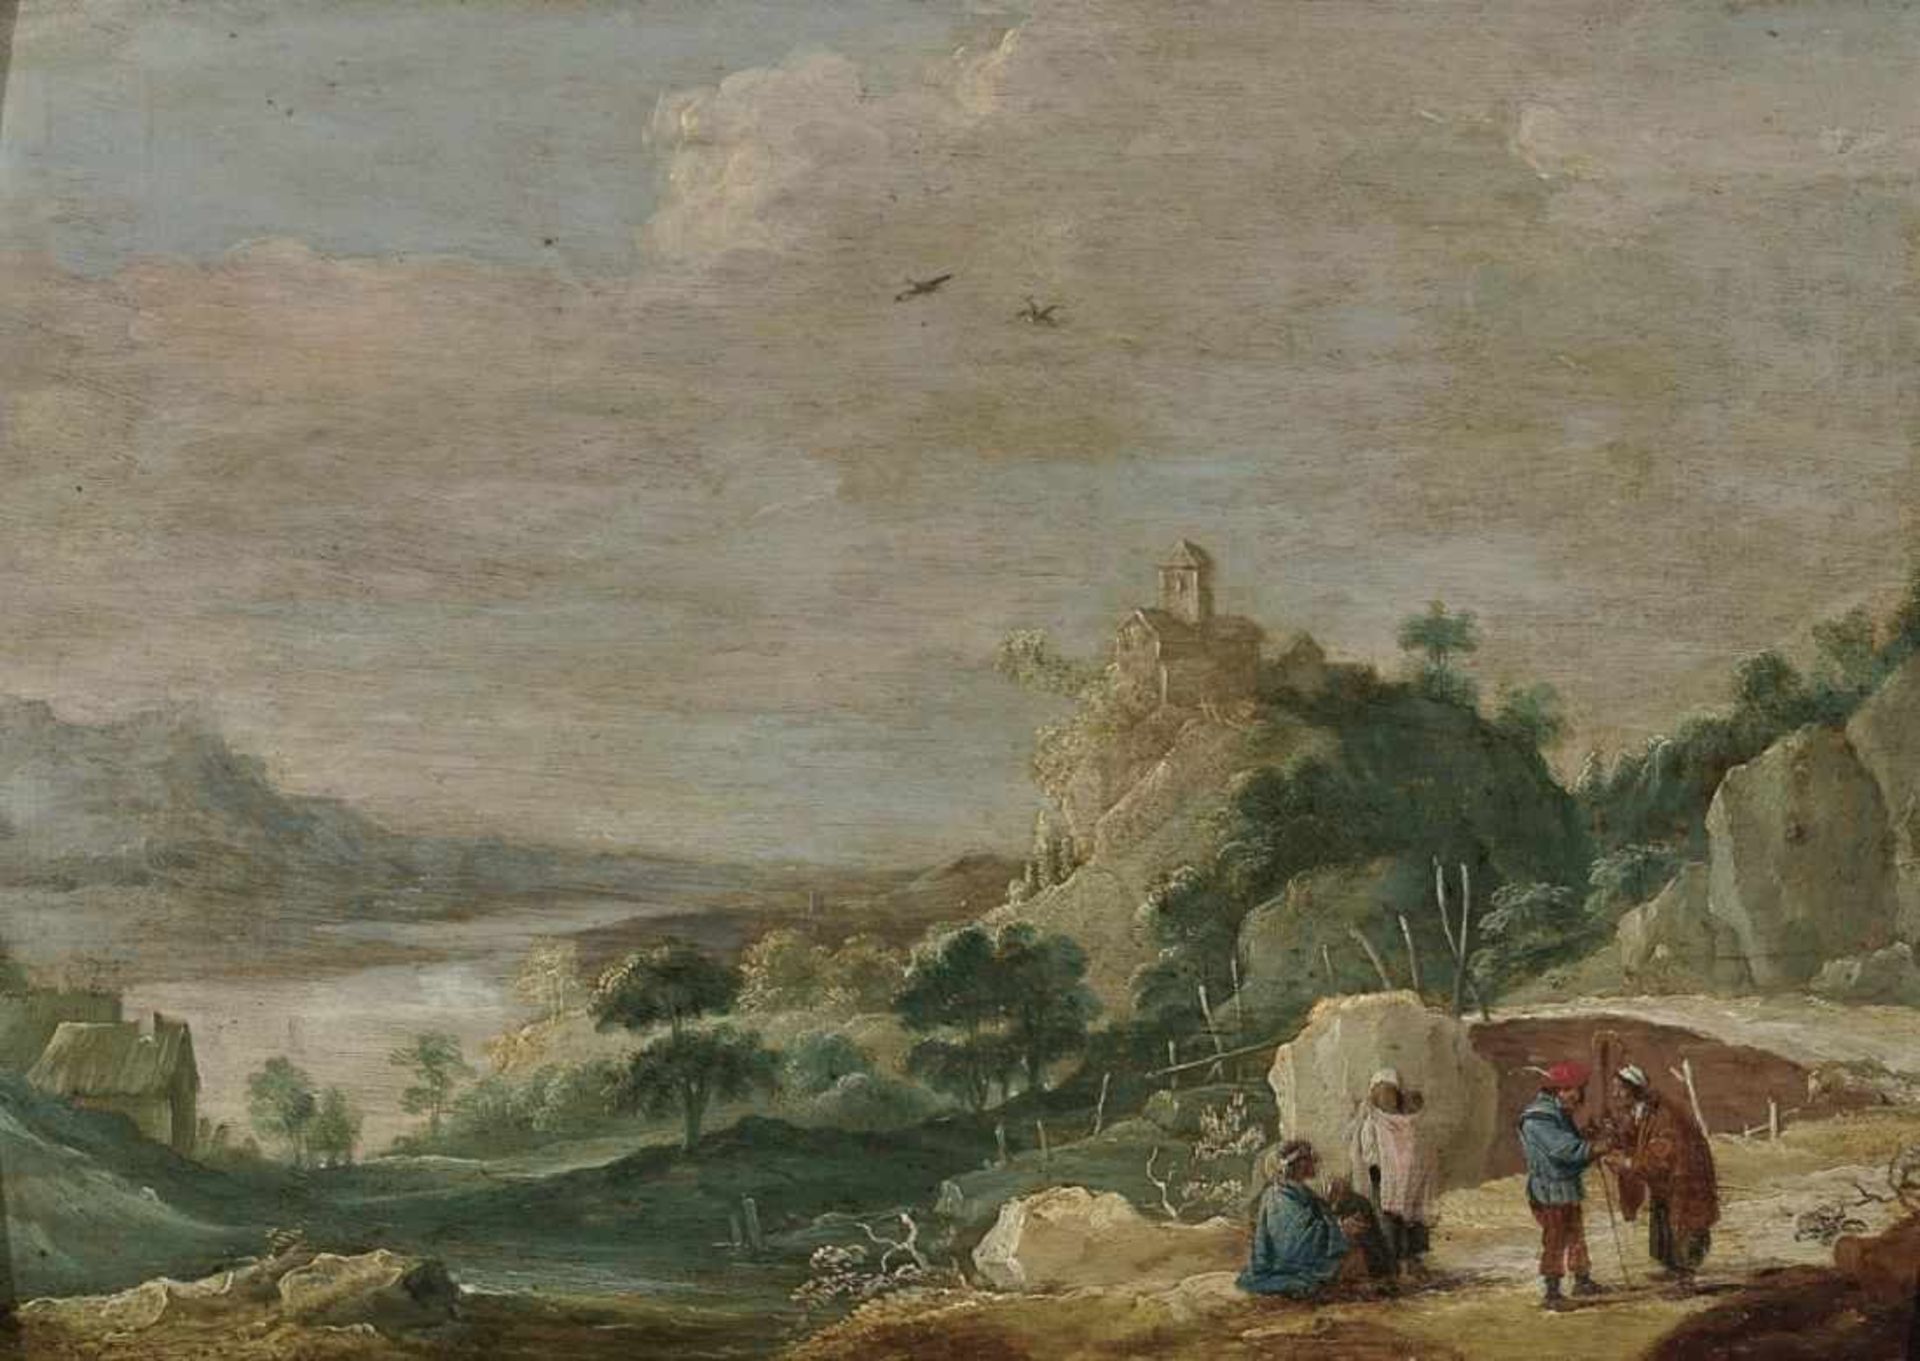 Flemish School, 17th centuryLandscape with Figure Scenery On the verso, collection stamp of ''Ing.